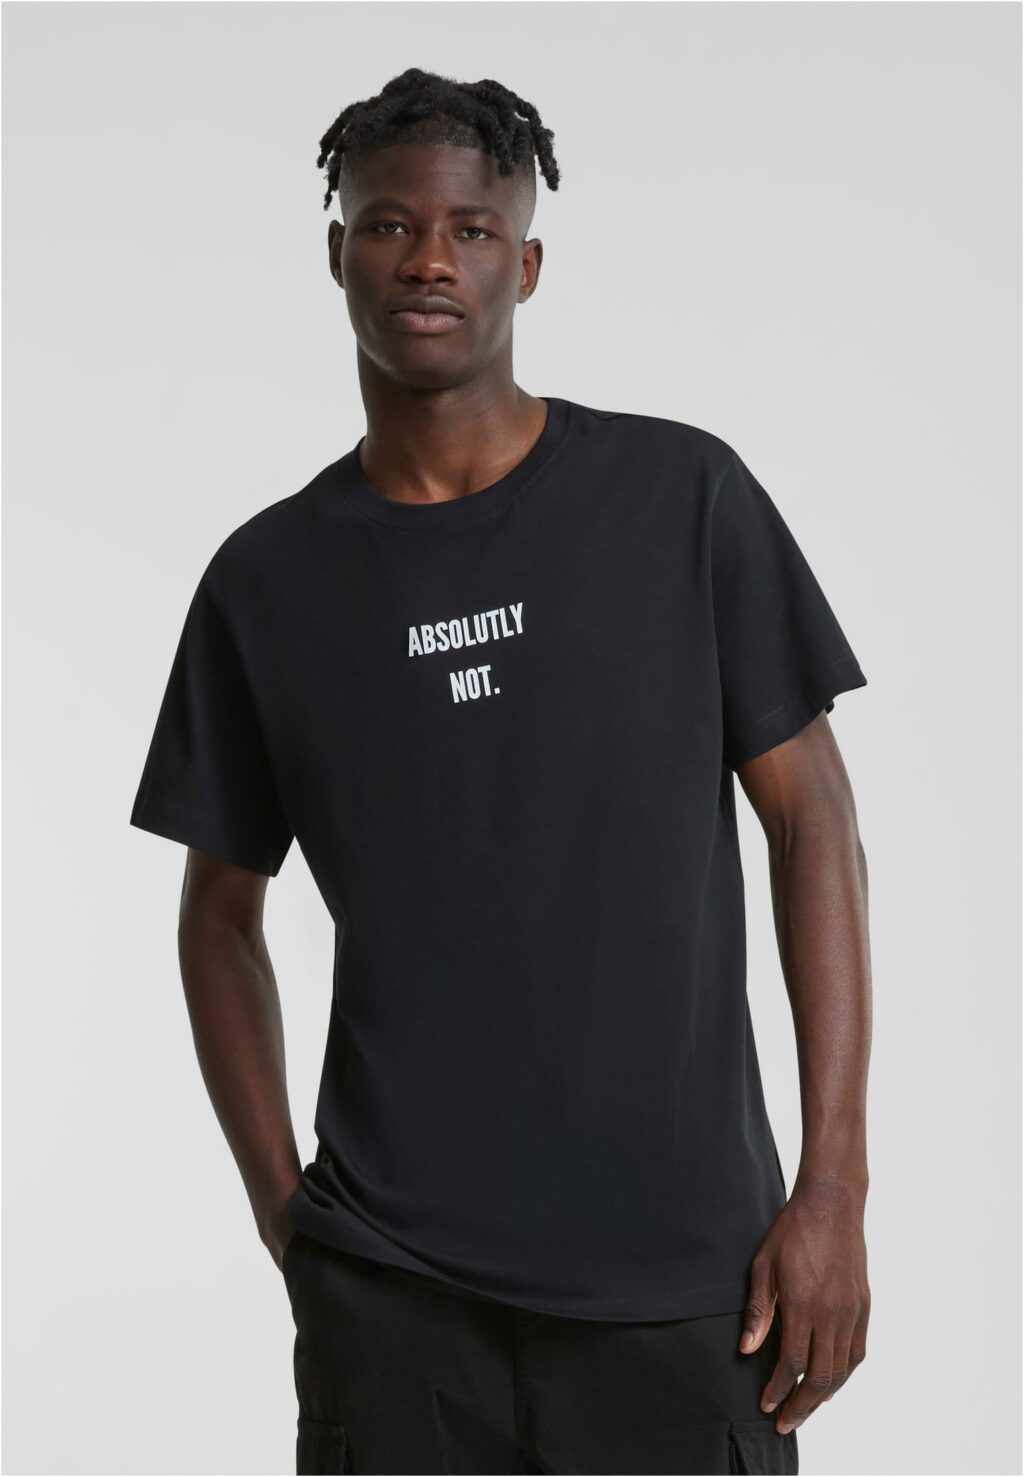 Absolutely Not Tee black MT2371